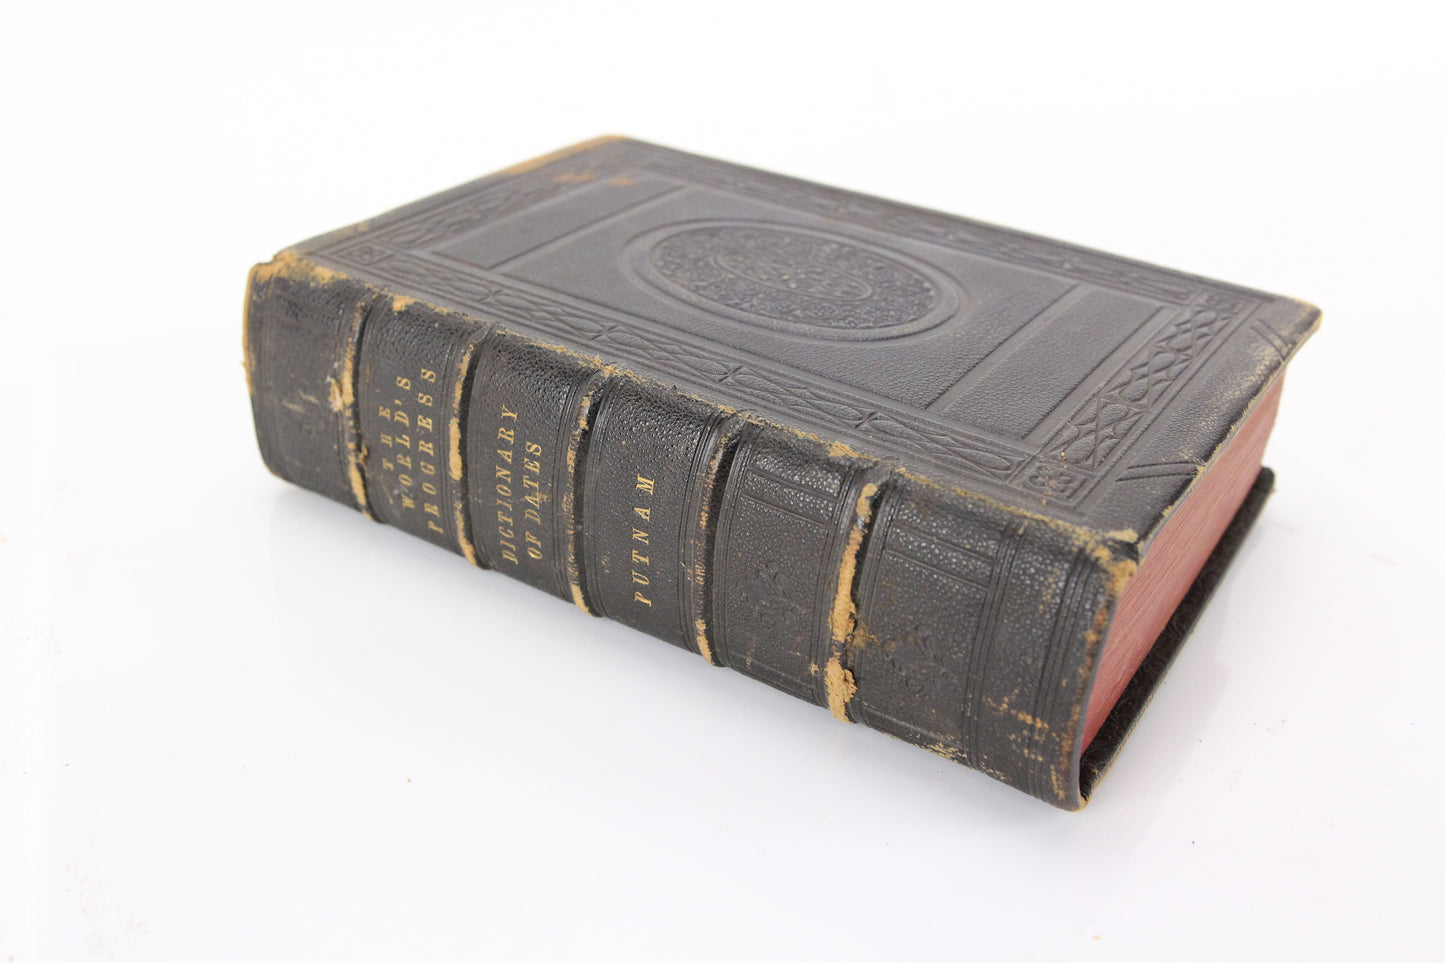 The World's Progress: Dictonary of Dates, Edited by G.P. Putnam, Copyright 1850